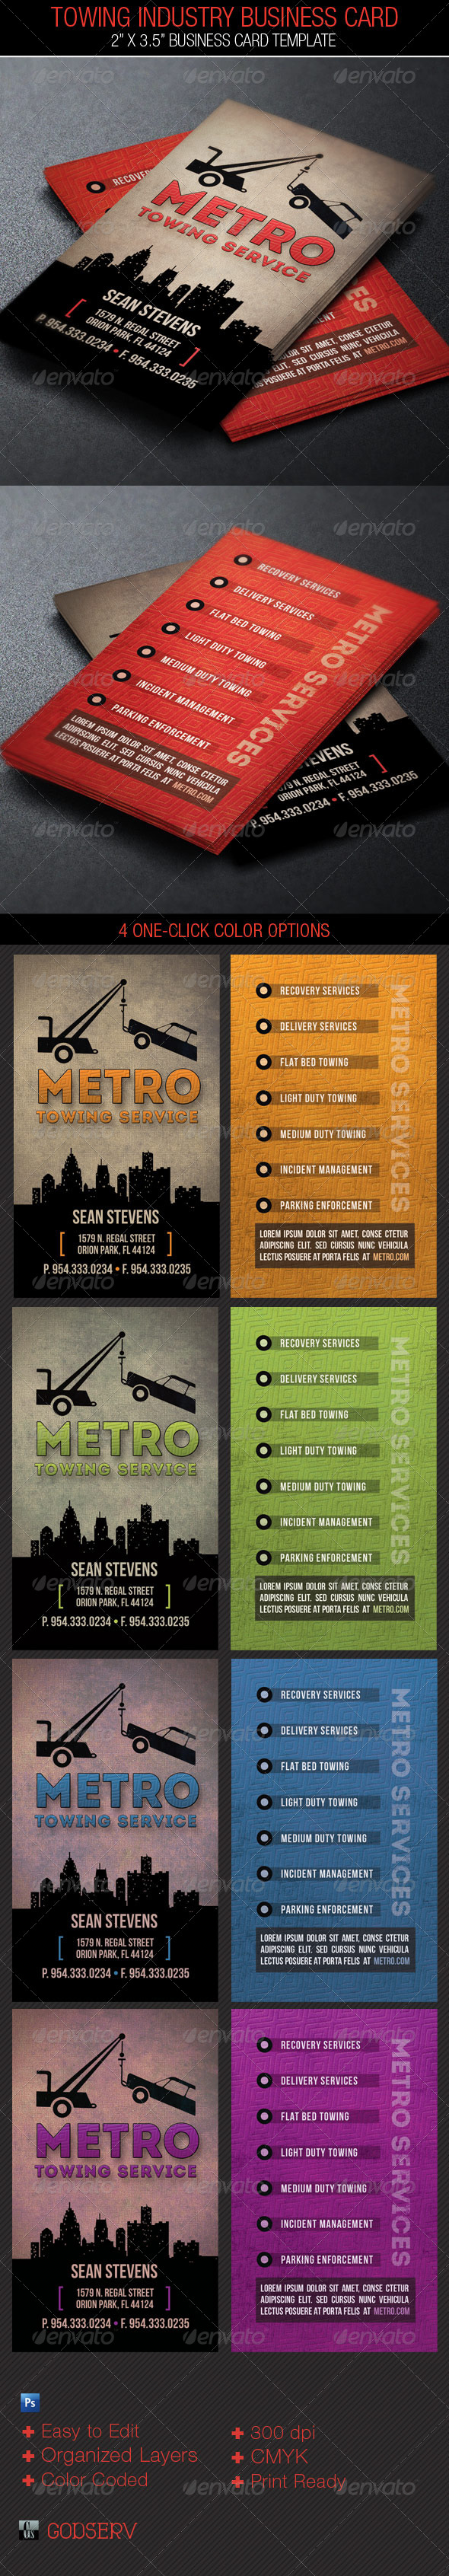 Towing-Industry-Business-Card-Template-Preview